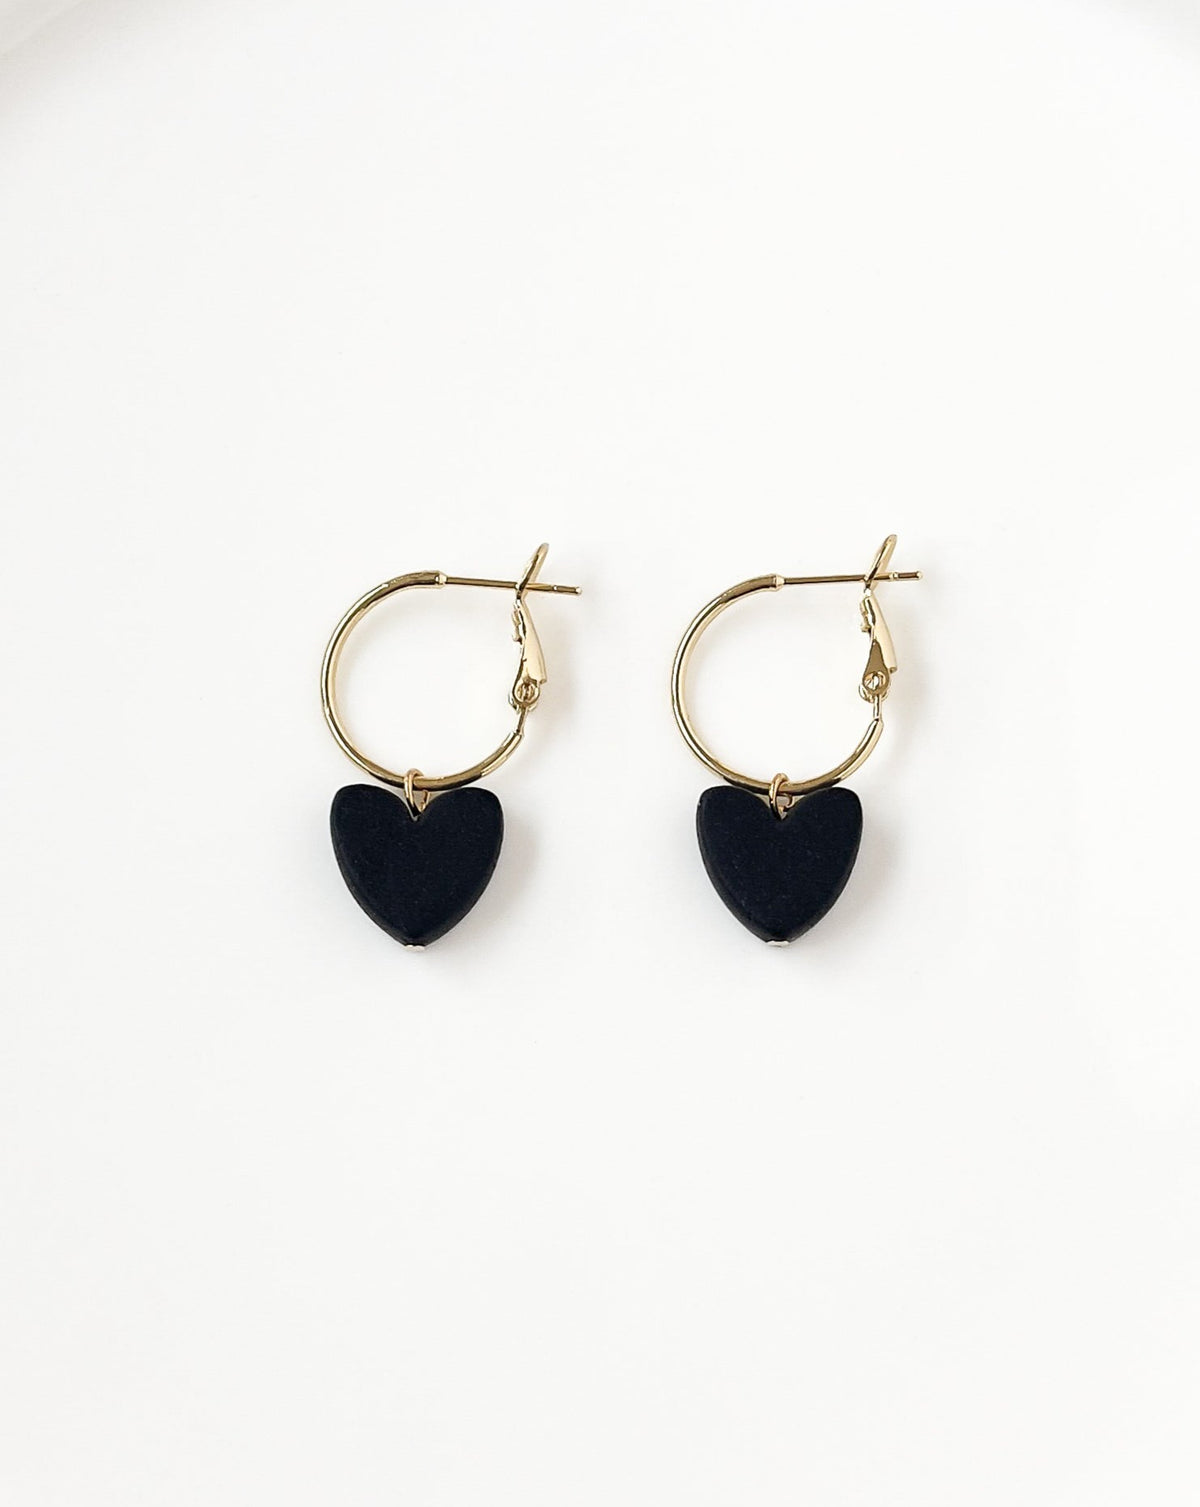 Close up of Charming Heart earrings with Gold regular Hoops and black Heart charm.